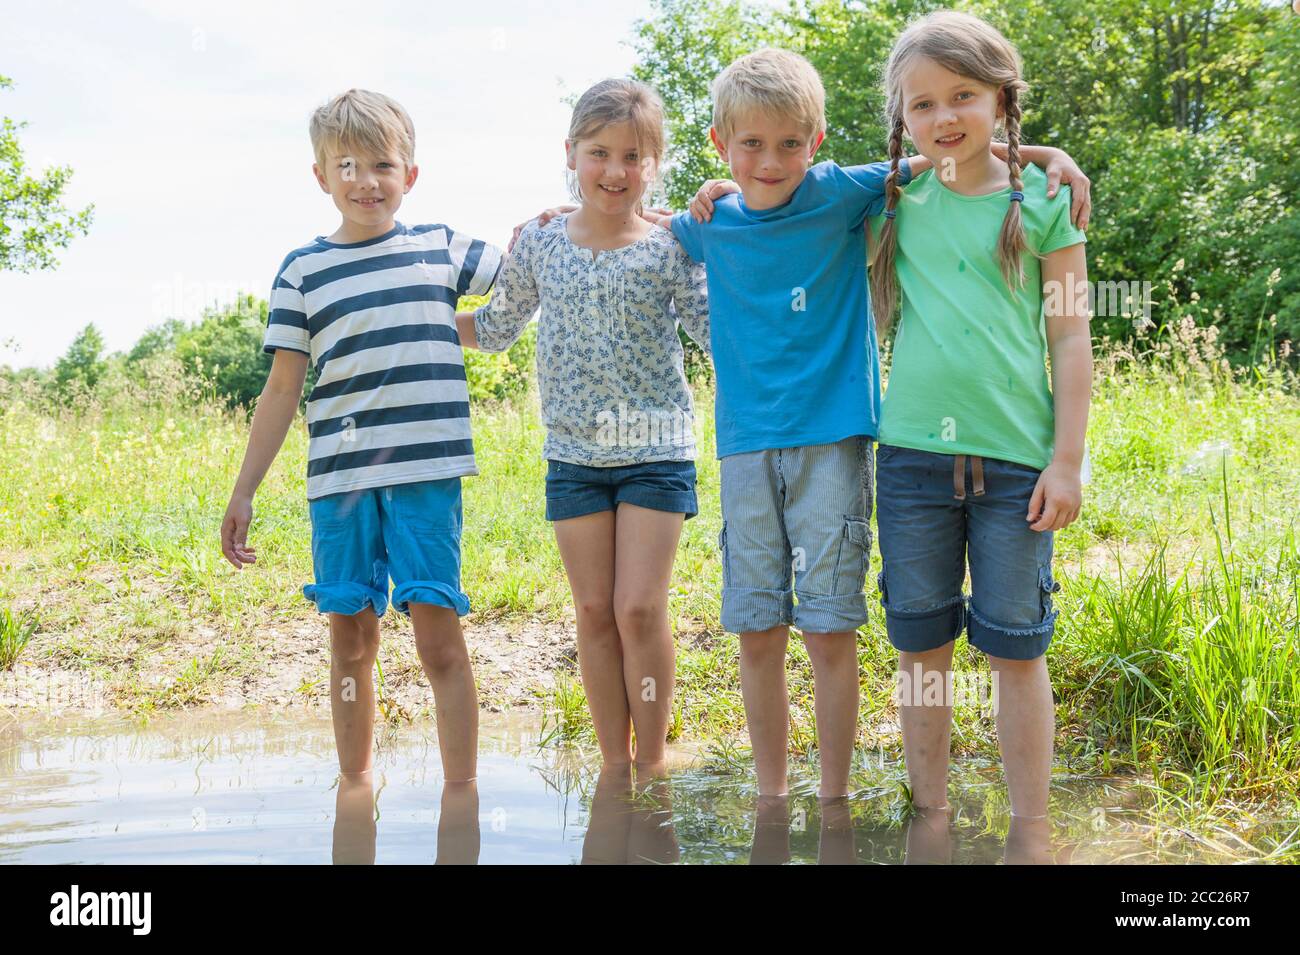 Germany, Bavaria, Munich, Friends standing in water, smiling Stock Photo